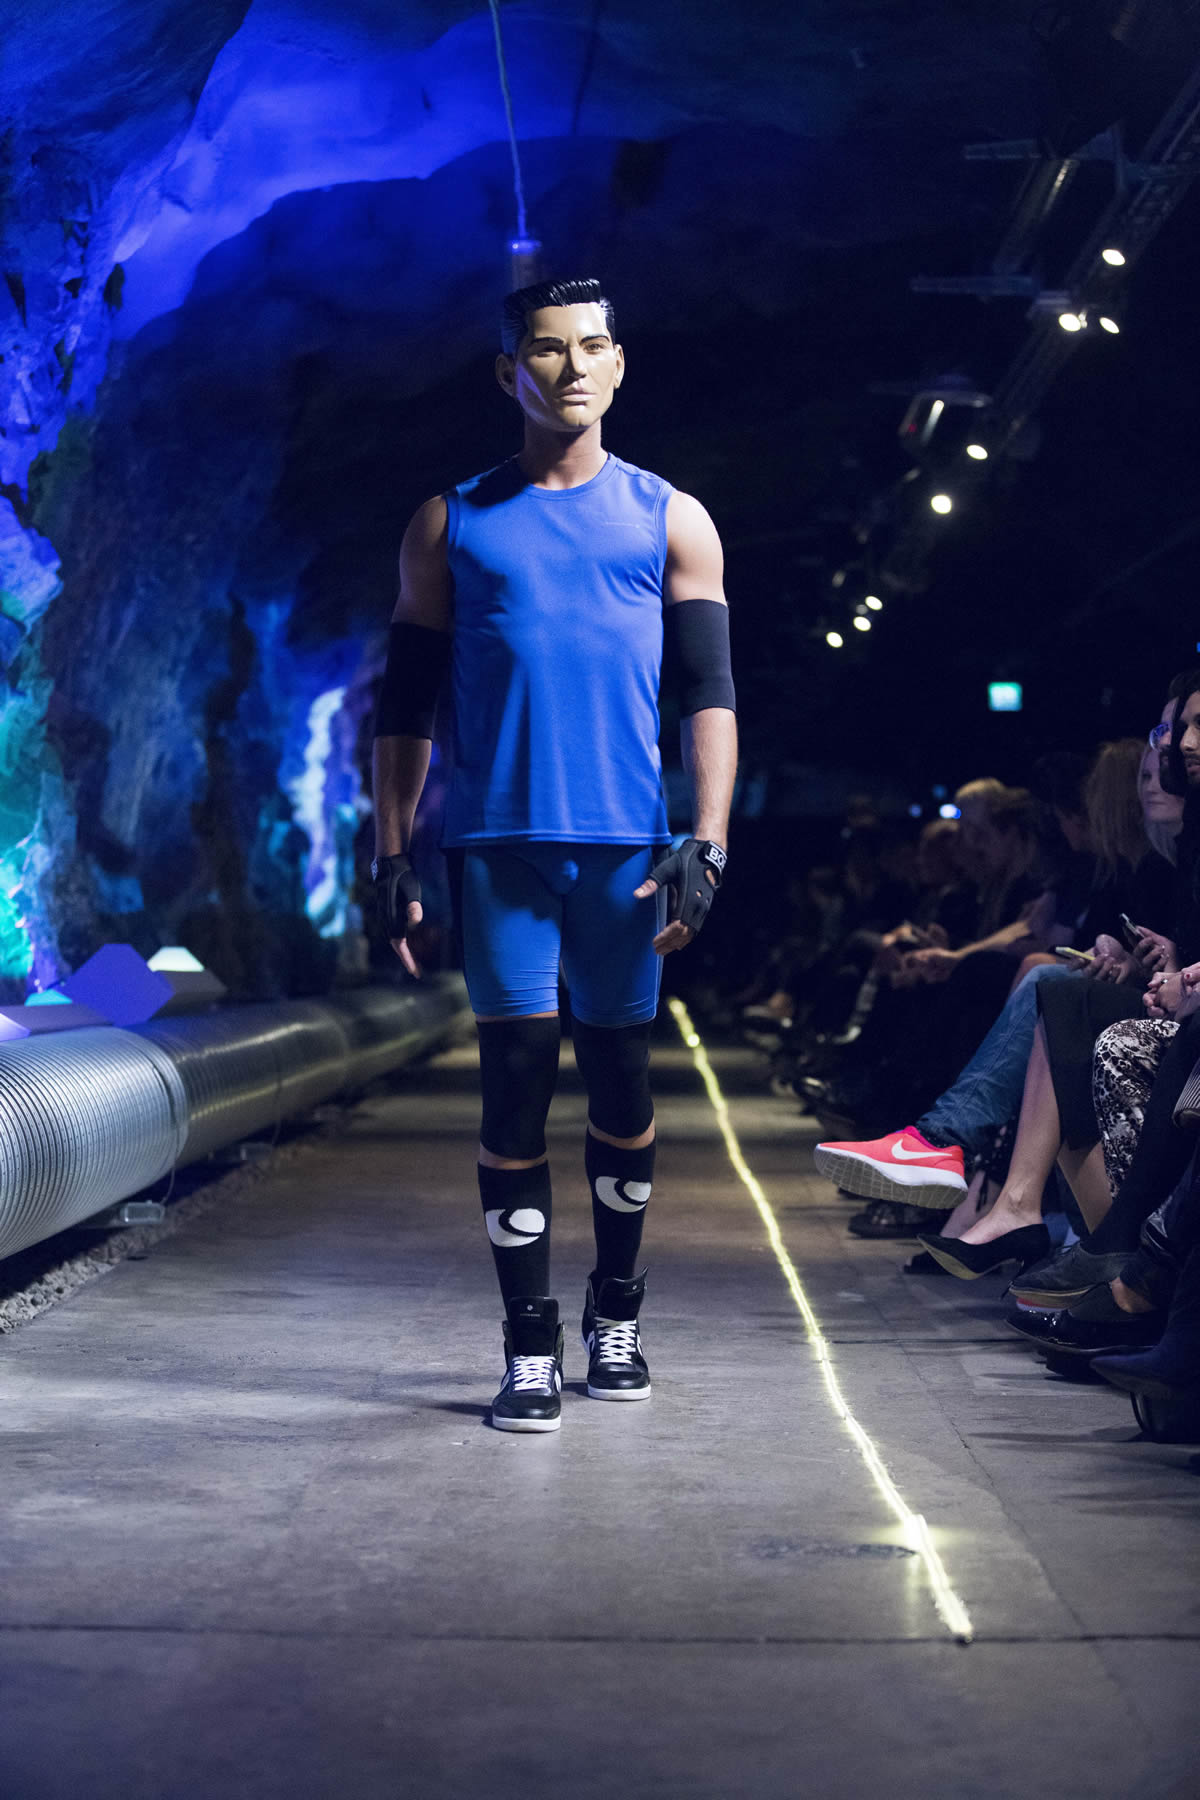 First person lover avatars on runway in björn borg show @fashion week stockholm